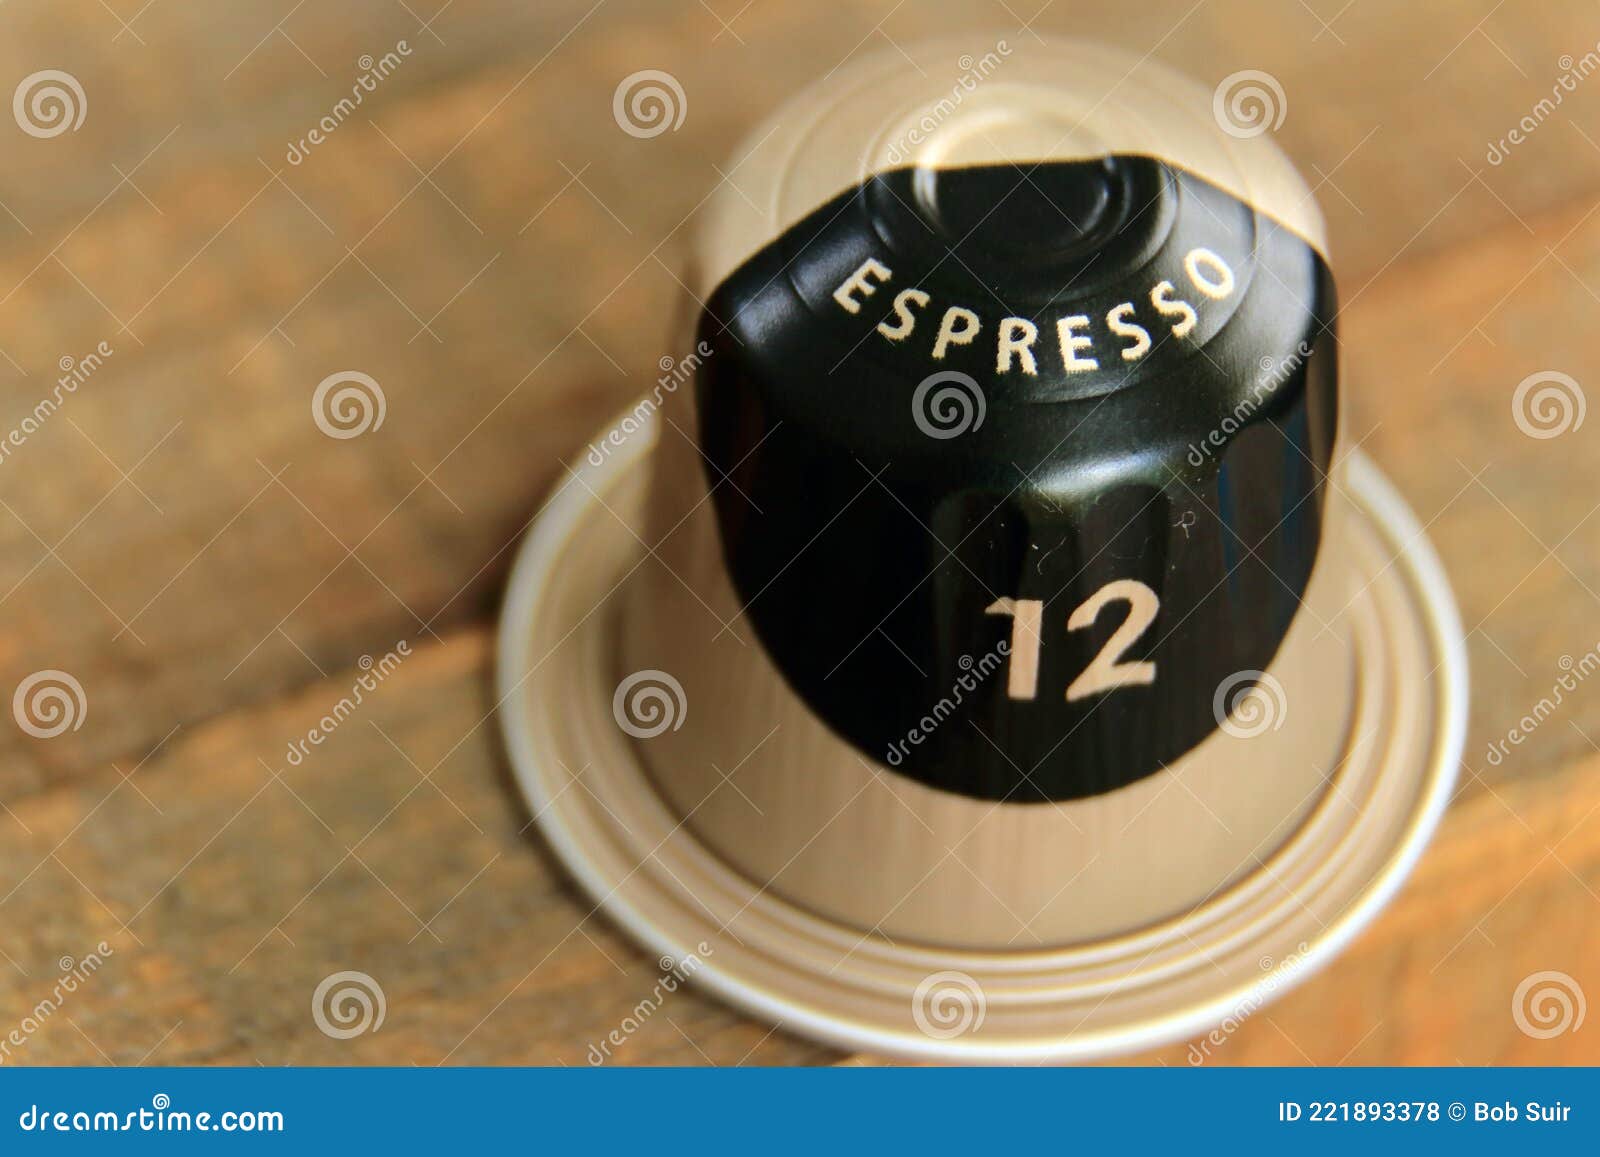 coffee capsule with the strenght number 12 flavour